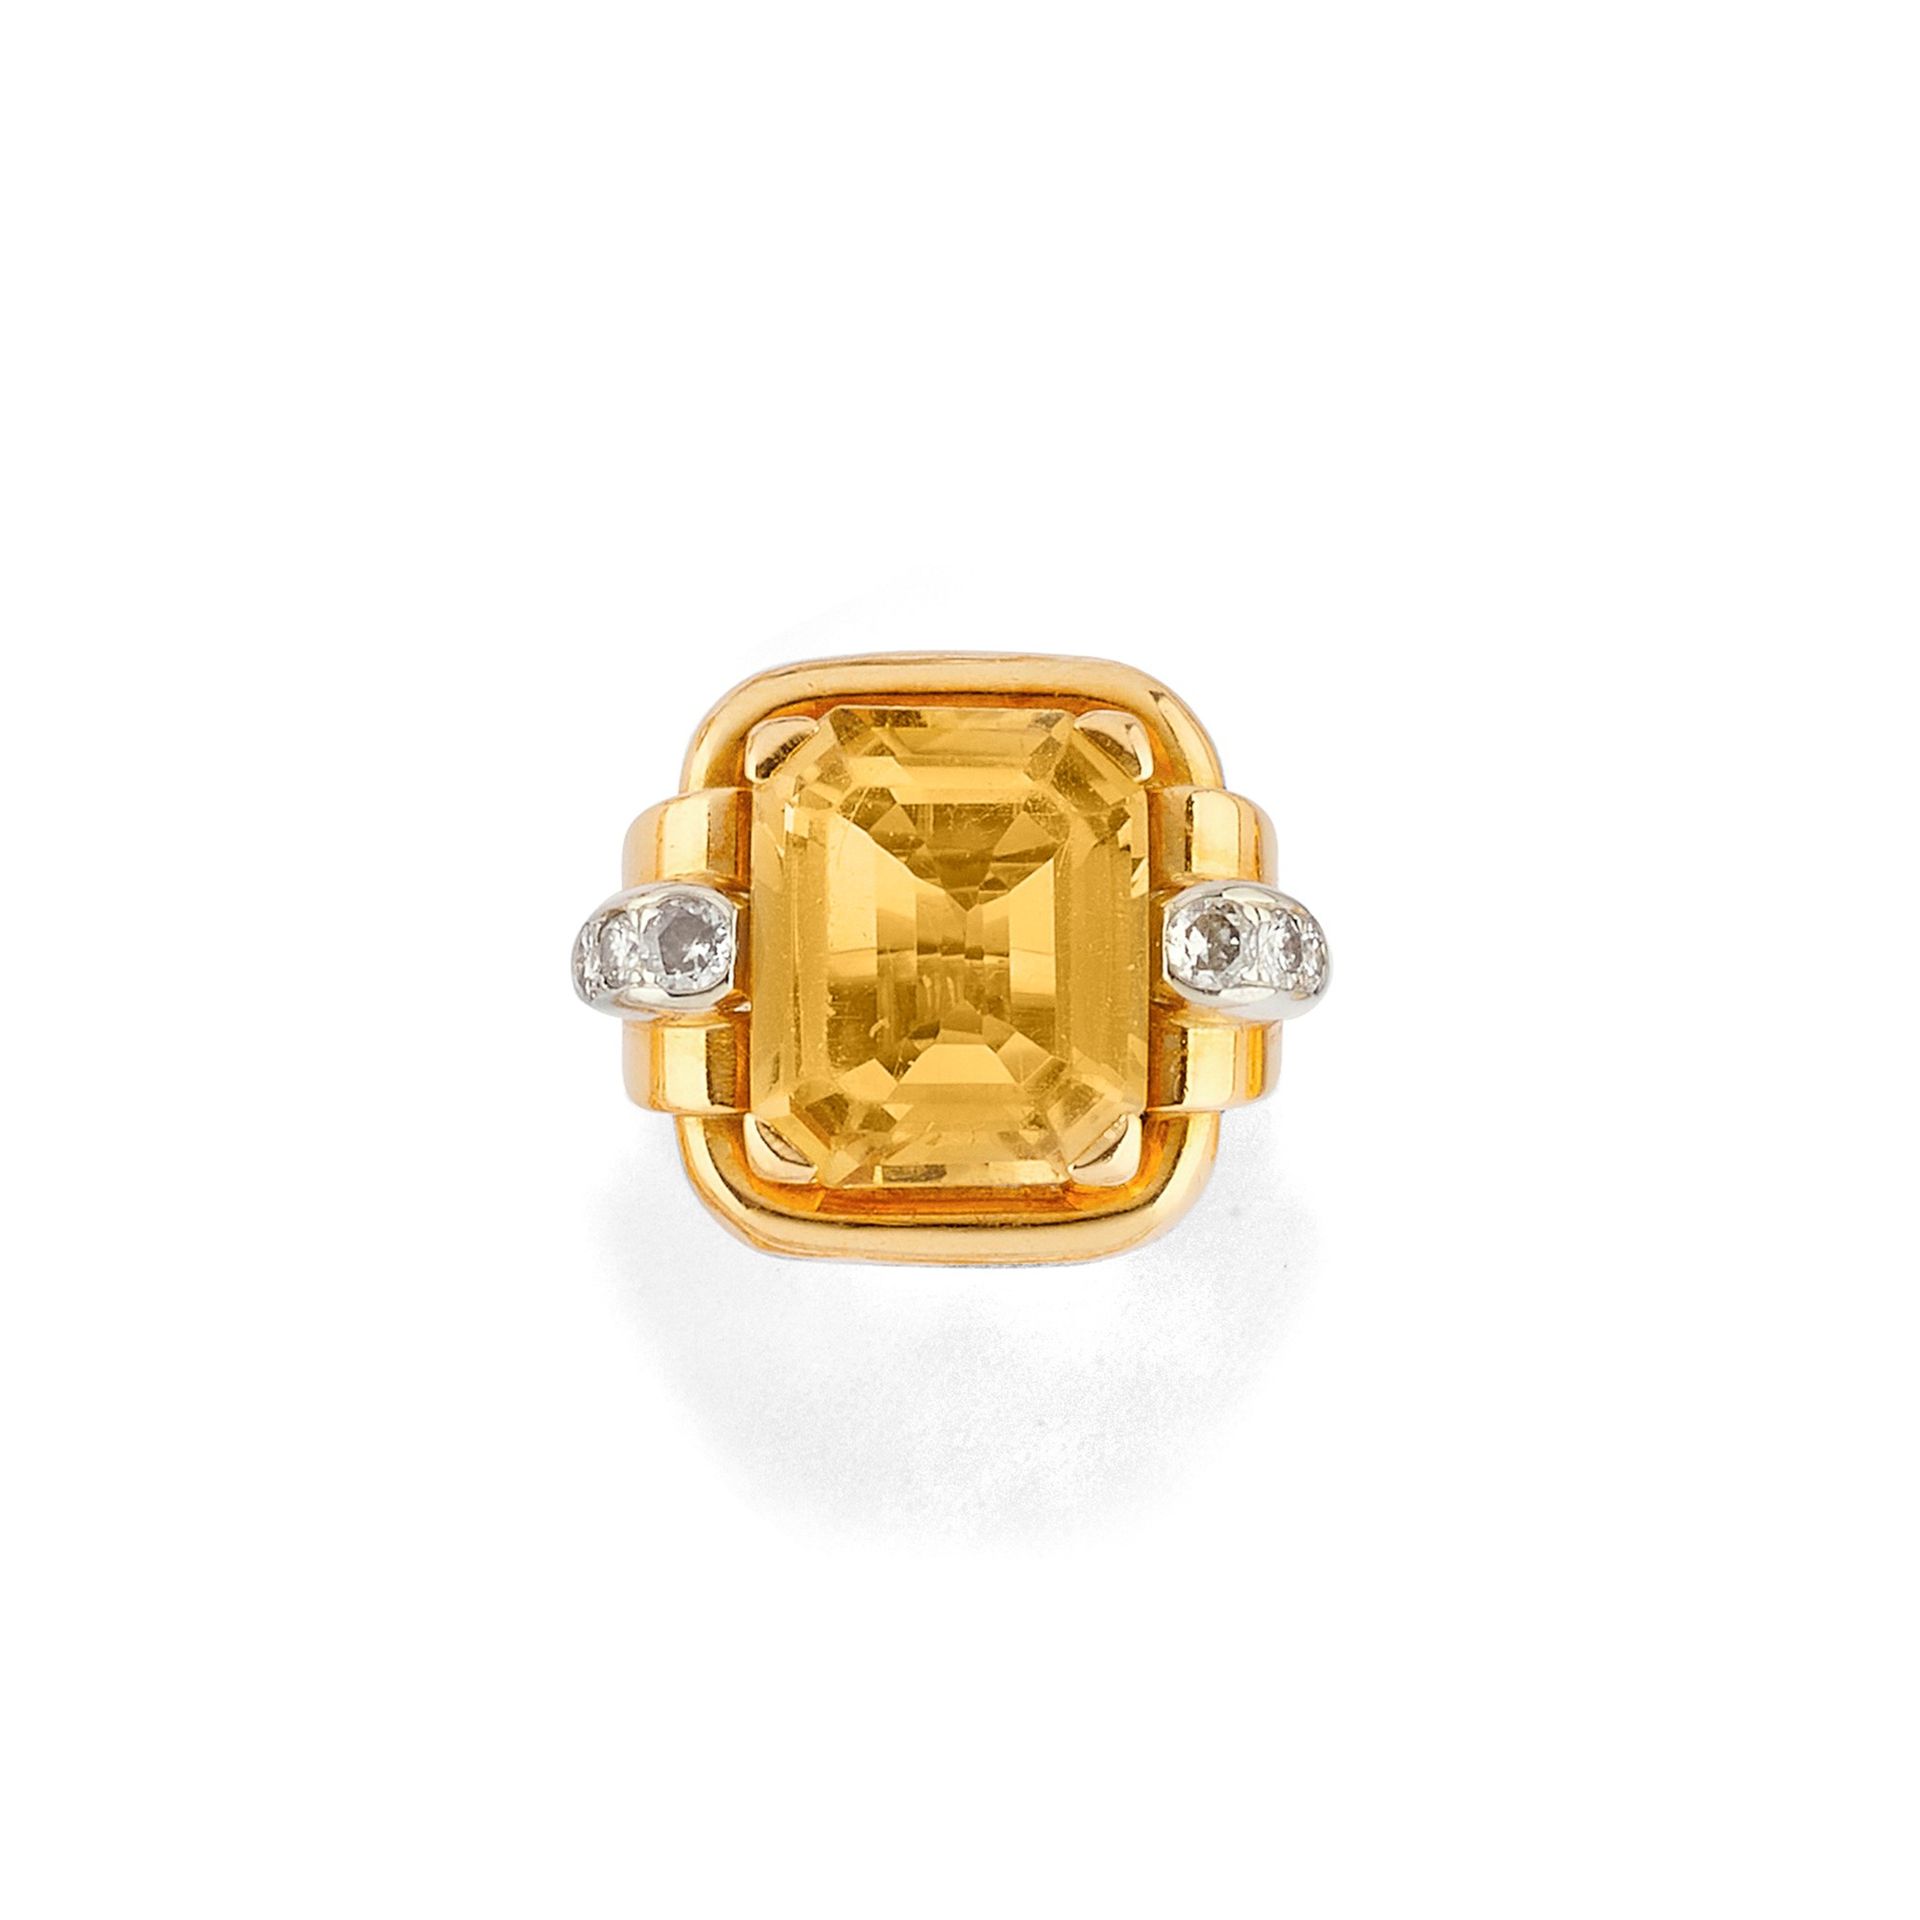 A 18K yellow gold,diamond and citrine quartz ring Weight g 15,20 size 12 